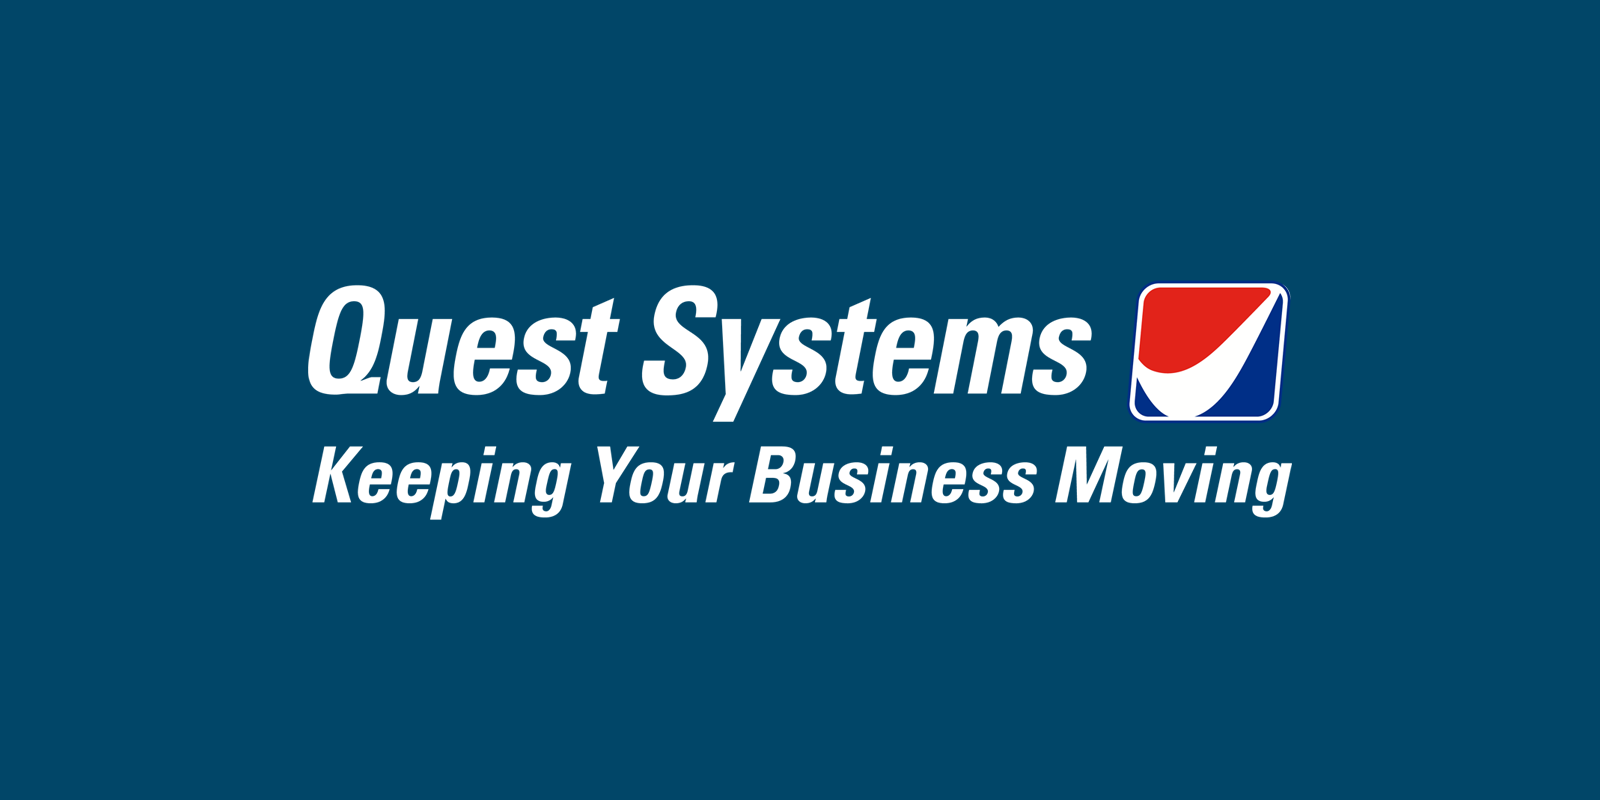 quest systems logo